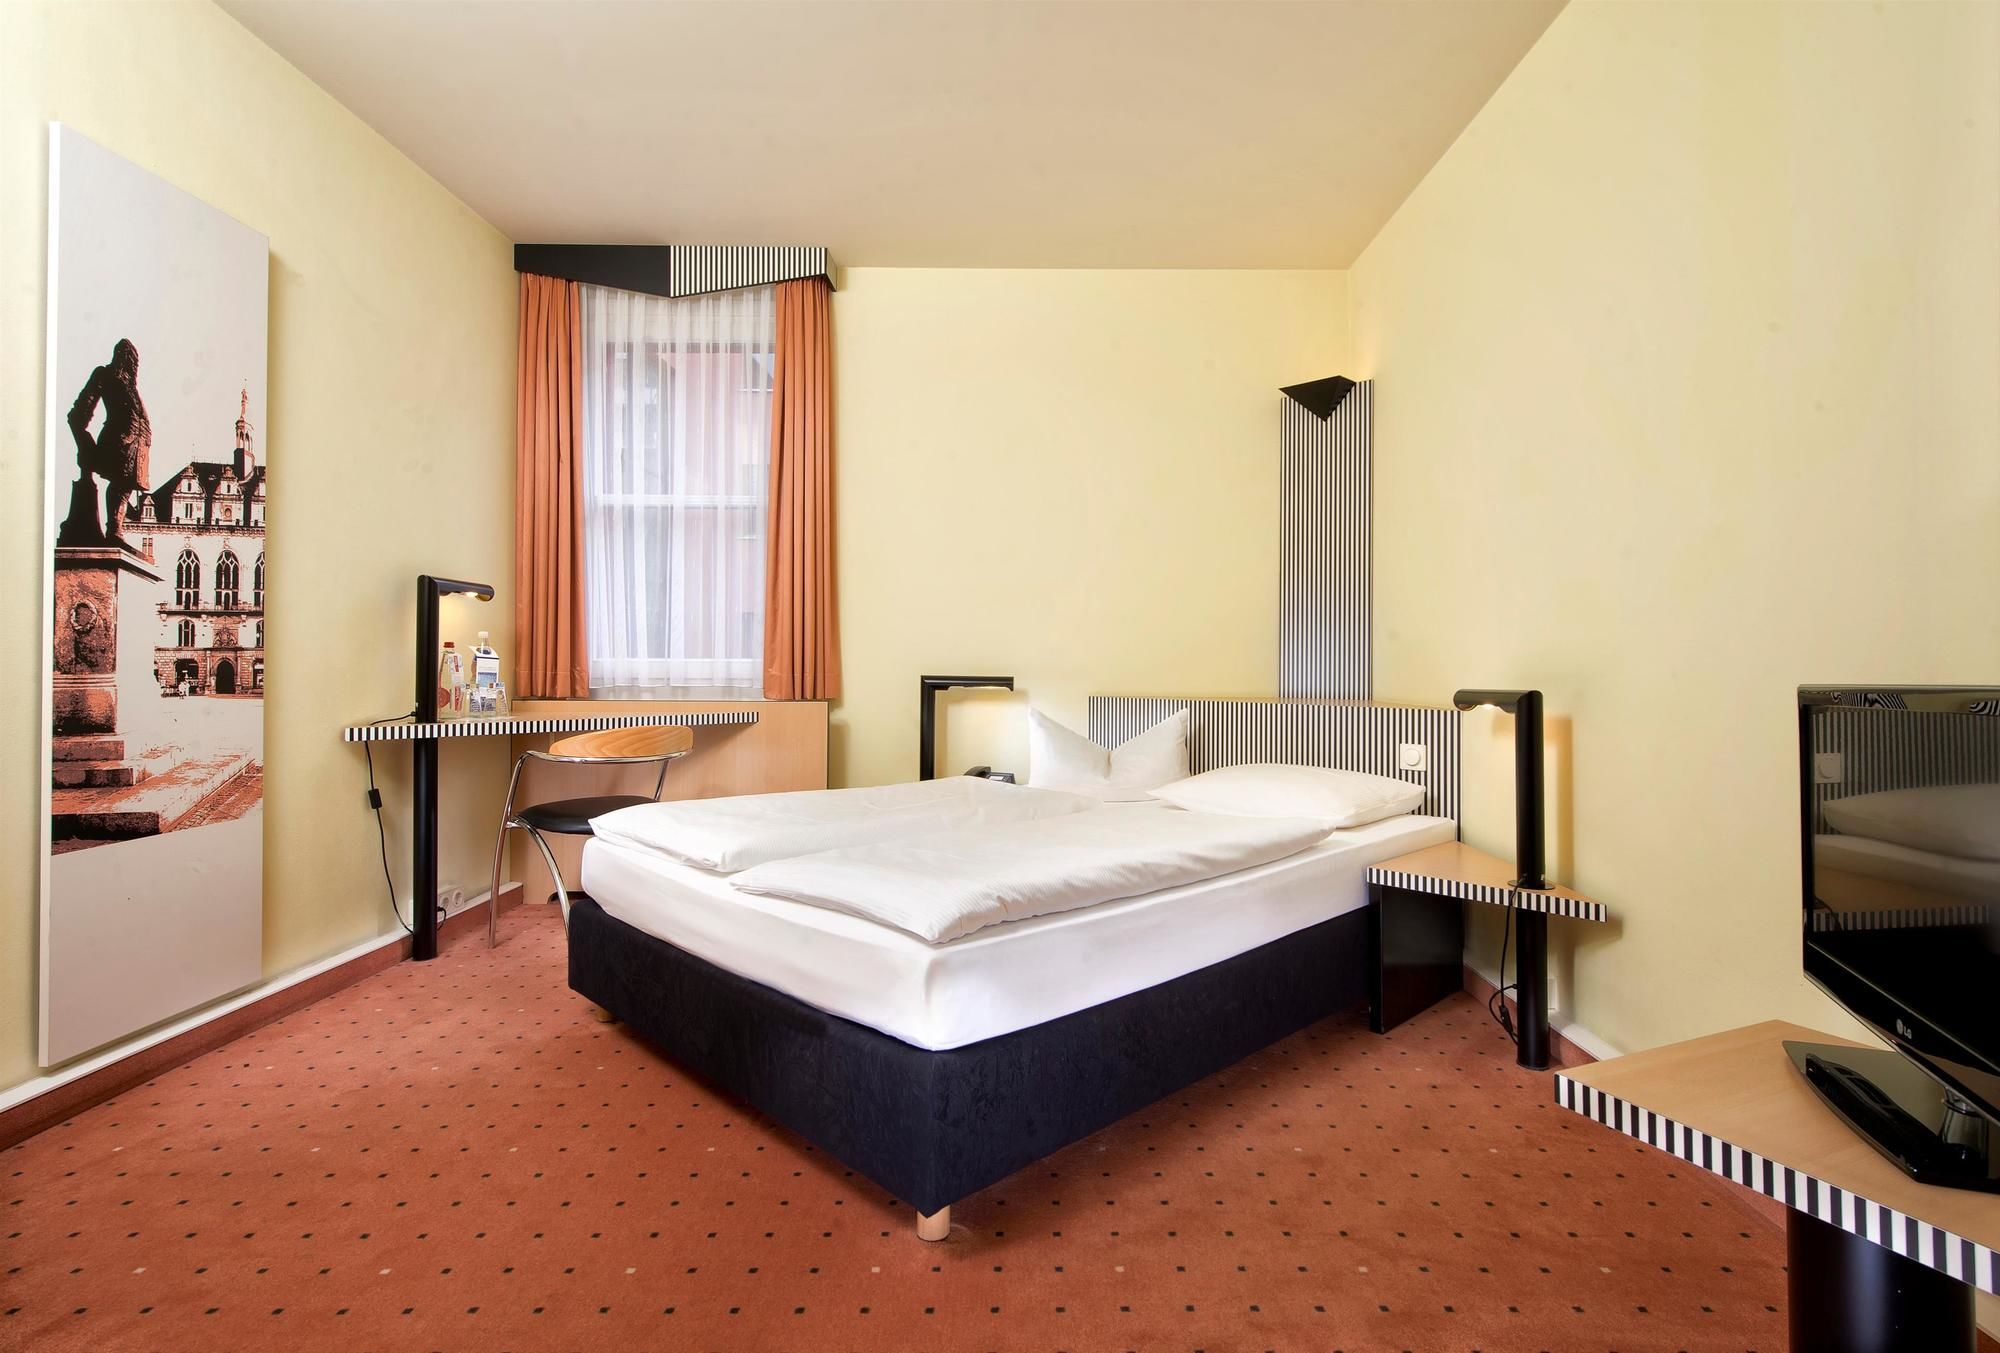 TRYP by Wyndham Halle in Halle!